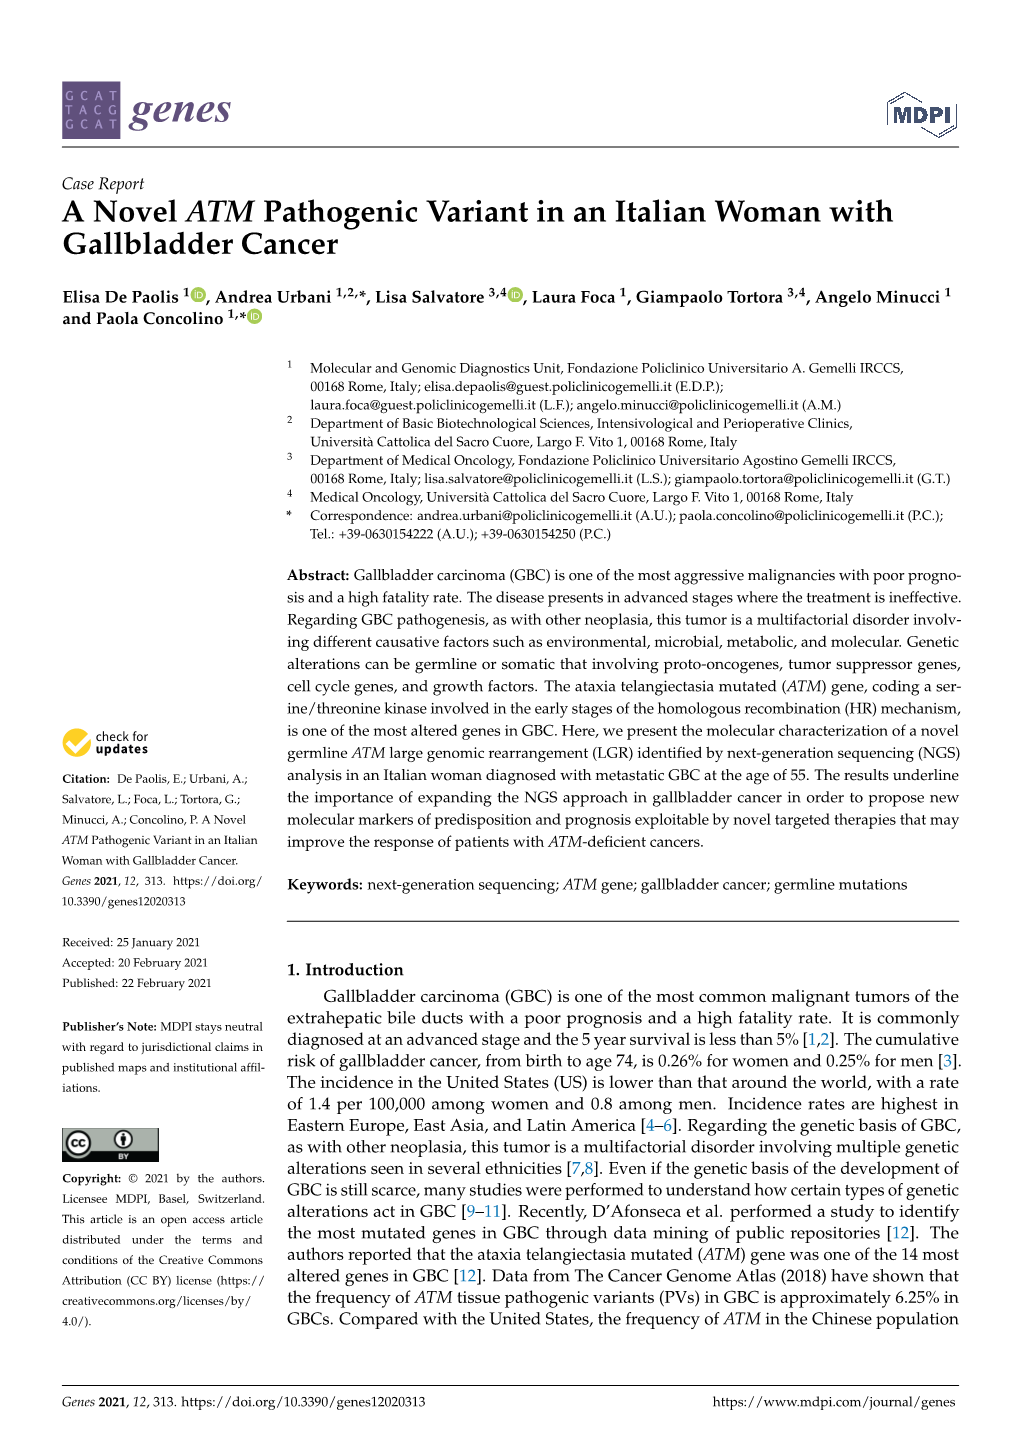 A Novel ATM Pathogenic Variant in an Italian Woman with Gallbladder Cancer